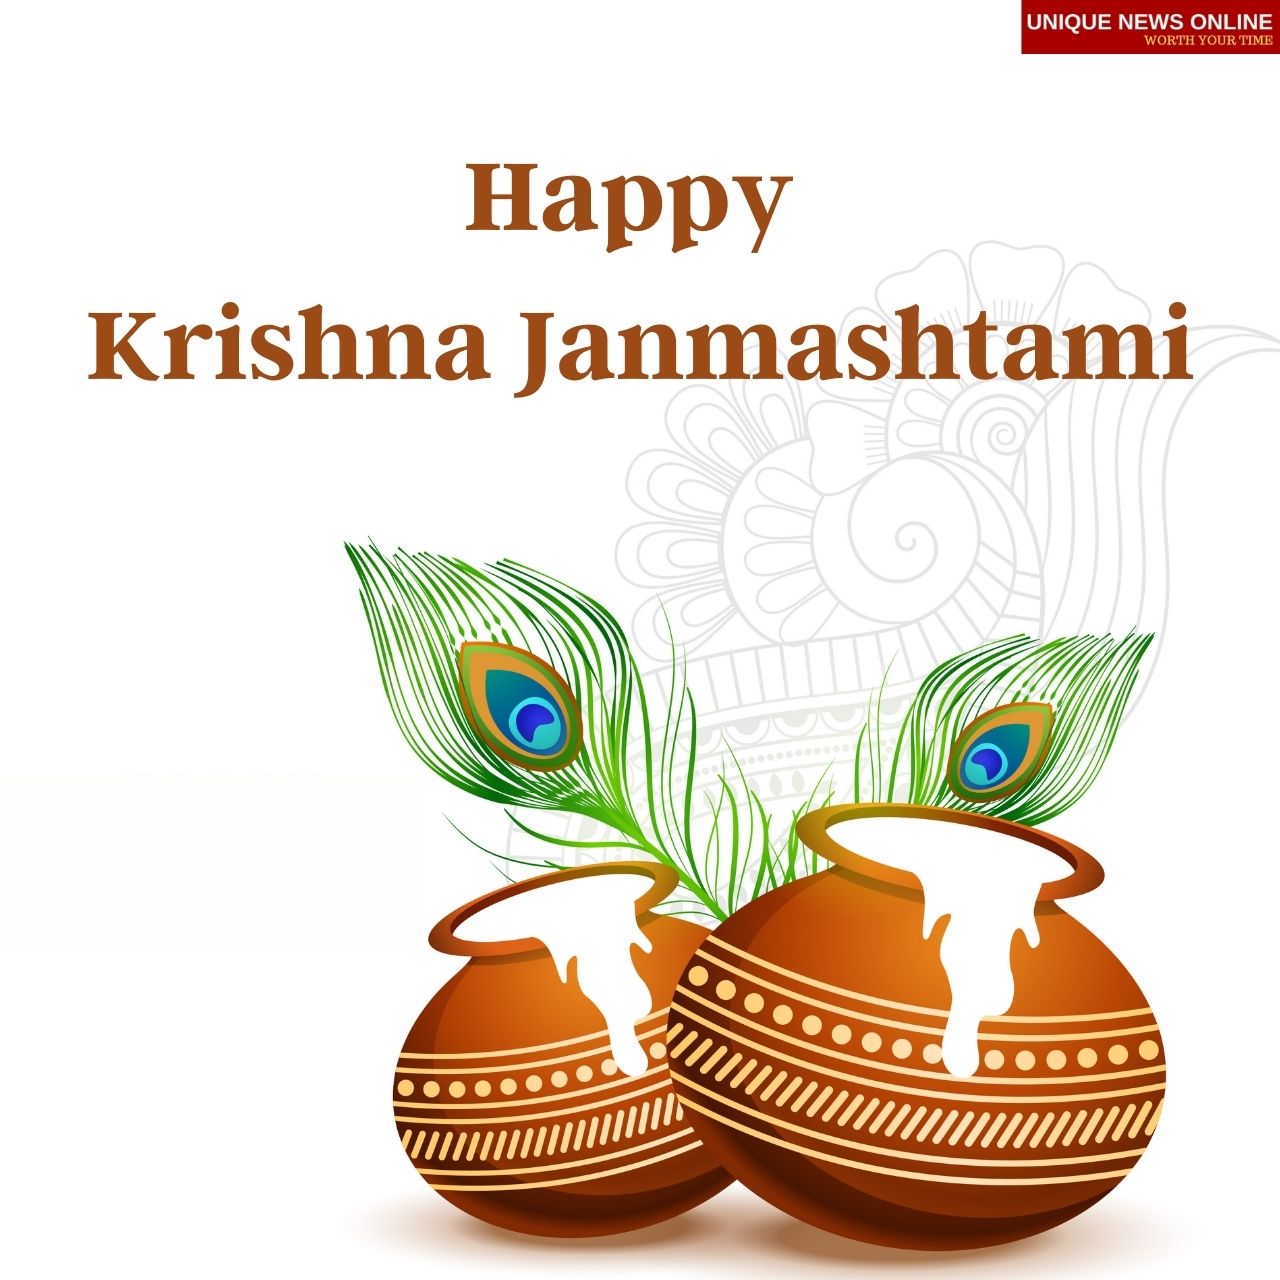 Happy Krishna Janmashtami 2021 Wishes, HD Images, Quotes, Messages, Greetings, Facebook & WhatsApp Status